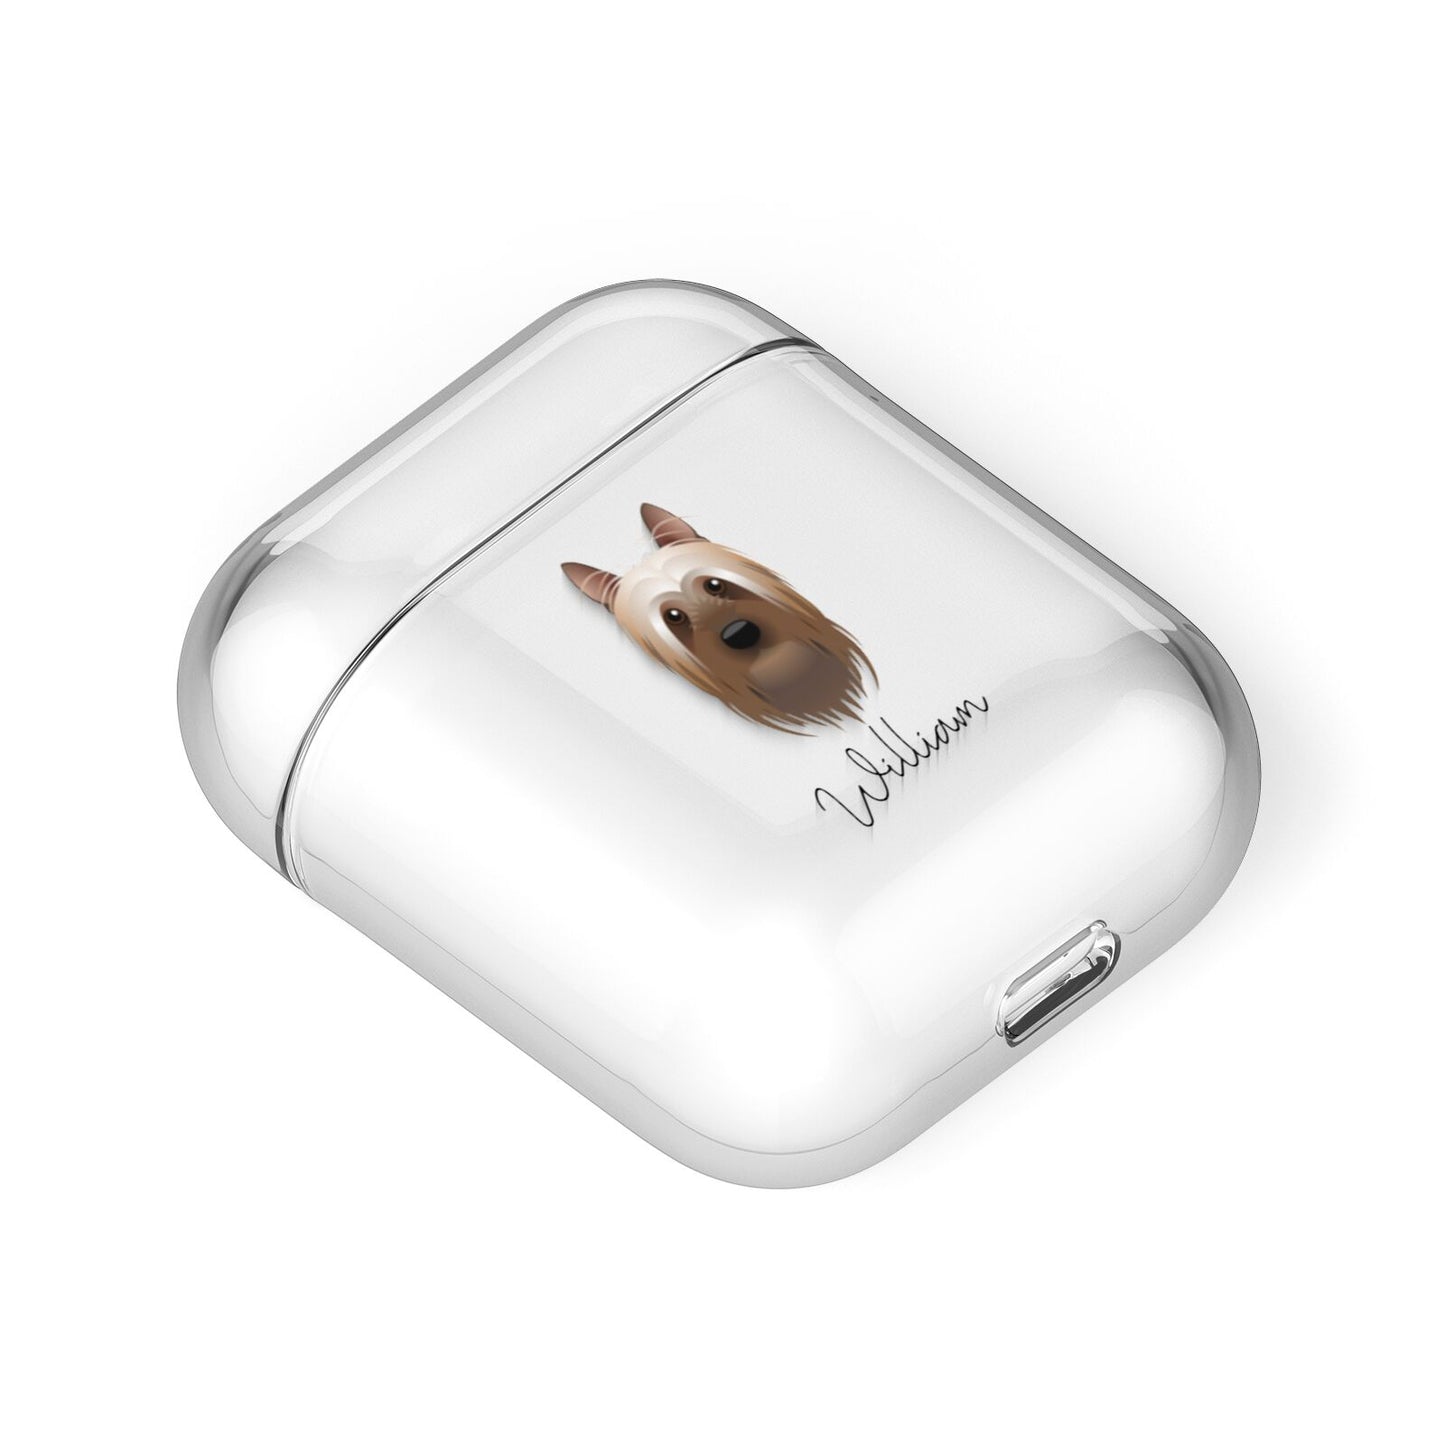 Australian Silky Terrier Personalised AirPods Case Laid Flat